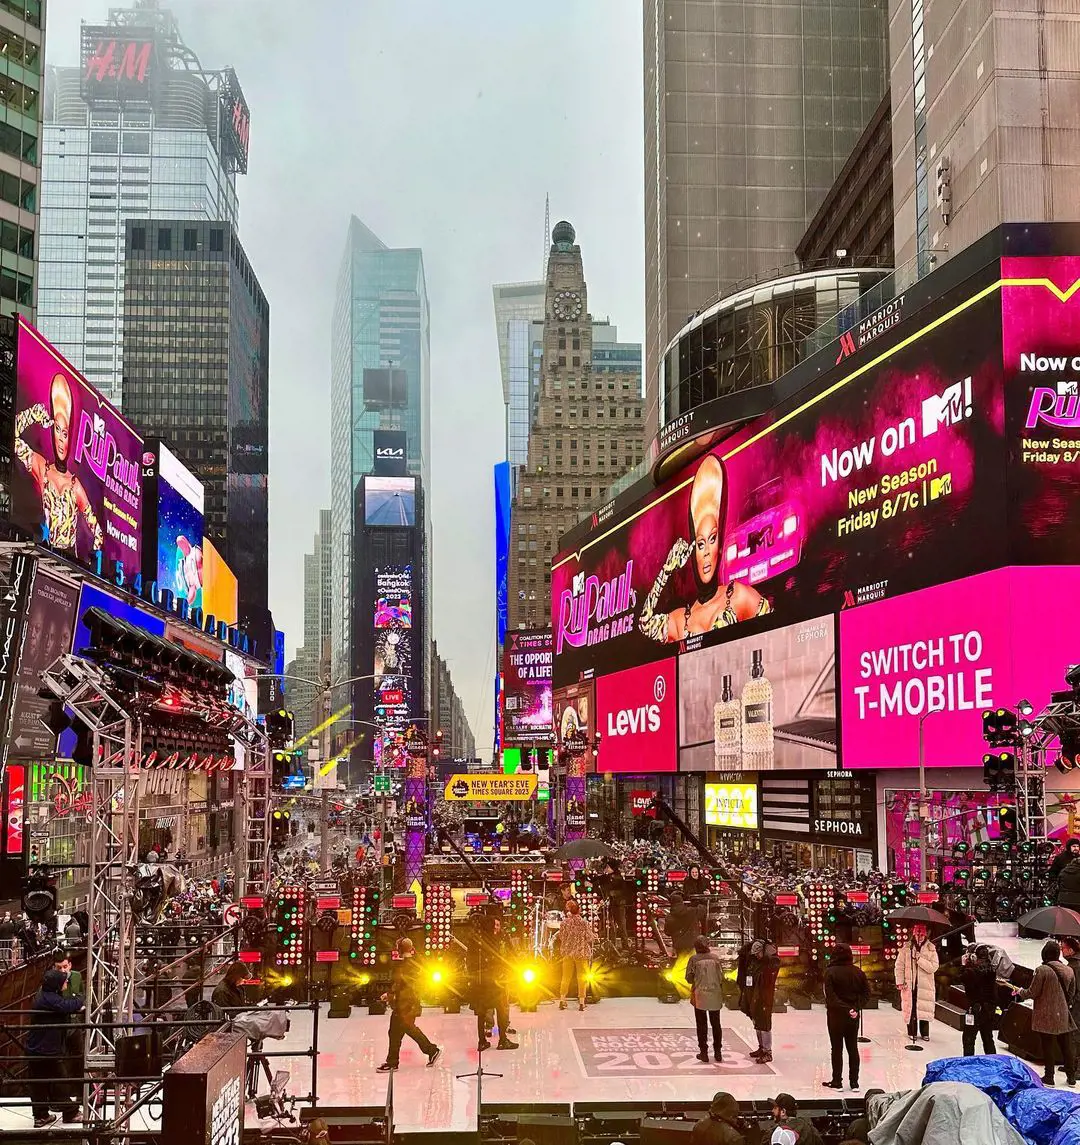 New Year Eve celebration at Times Square in 2022